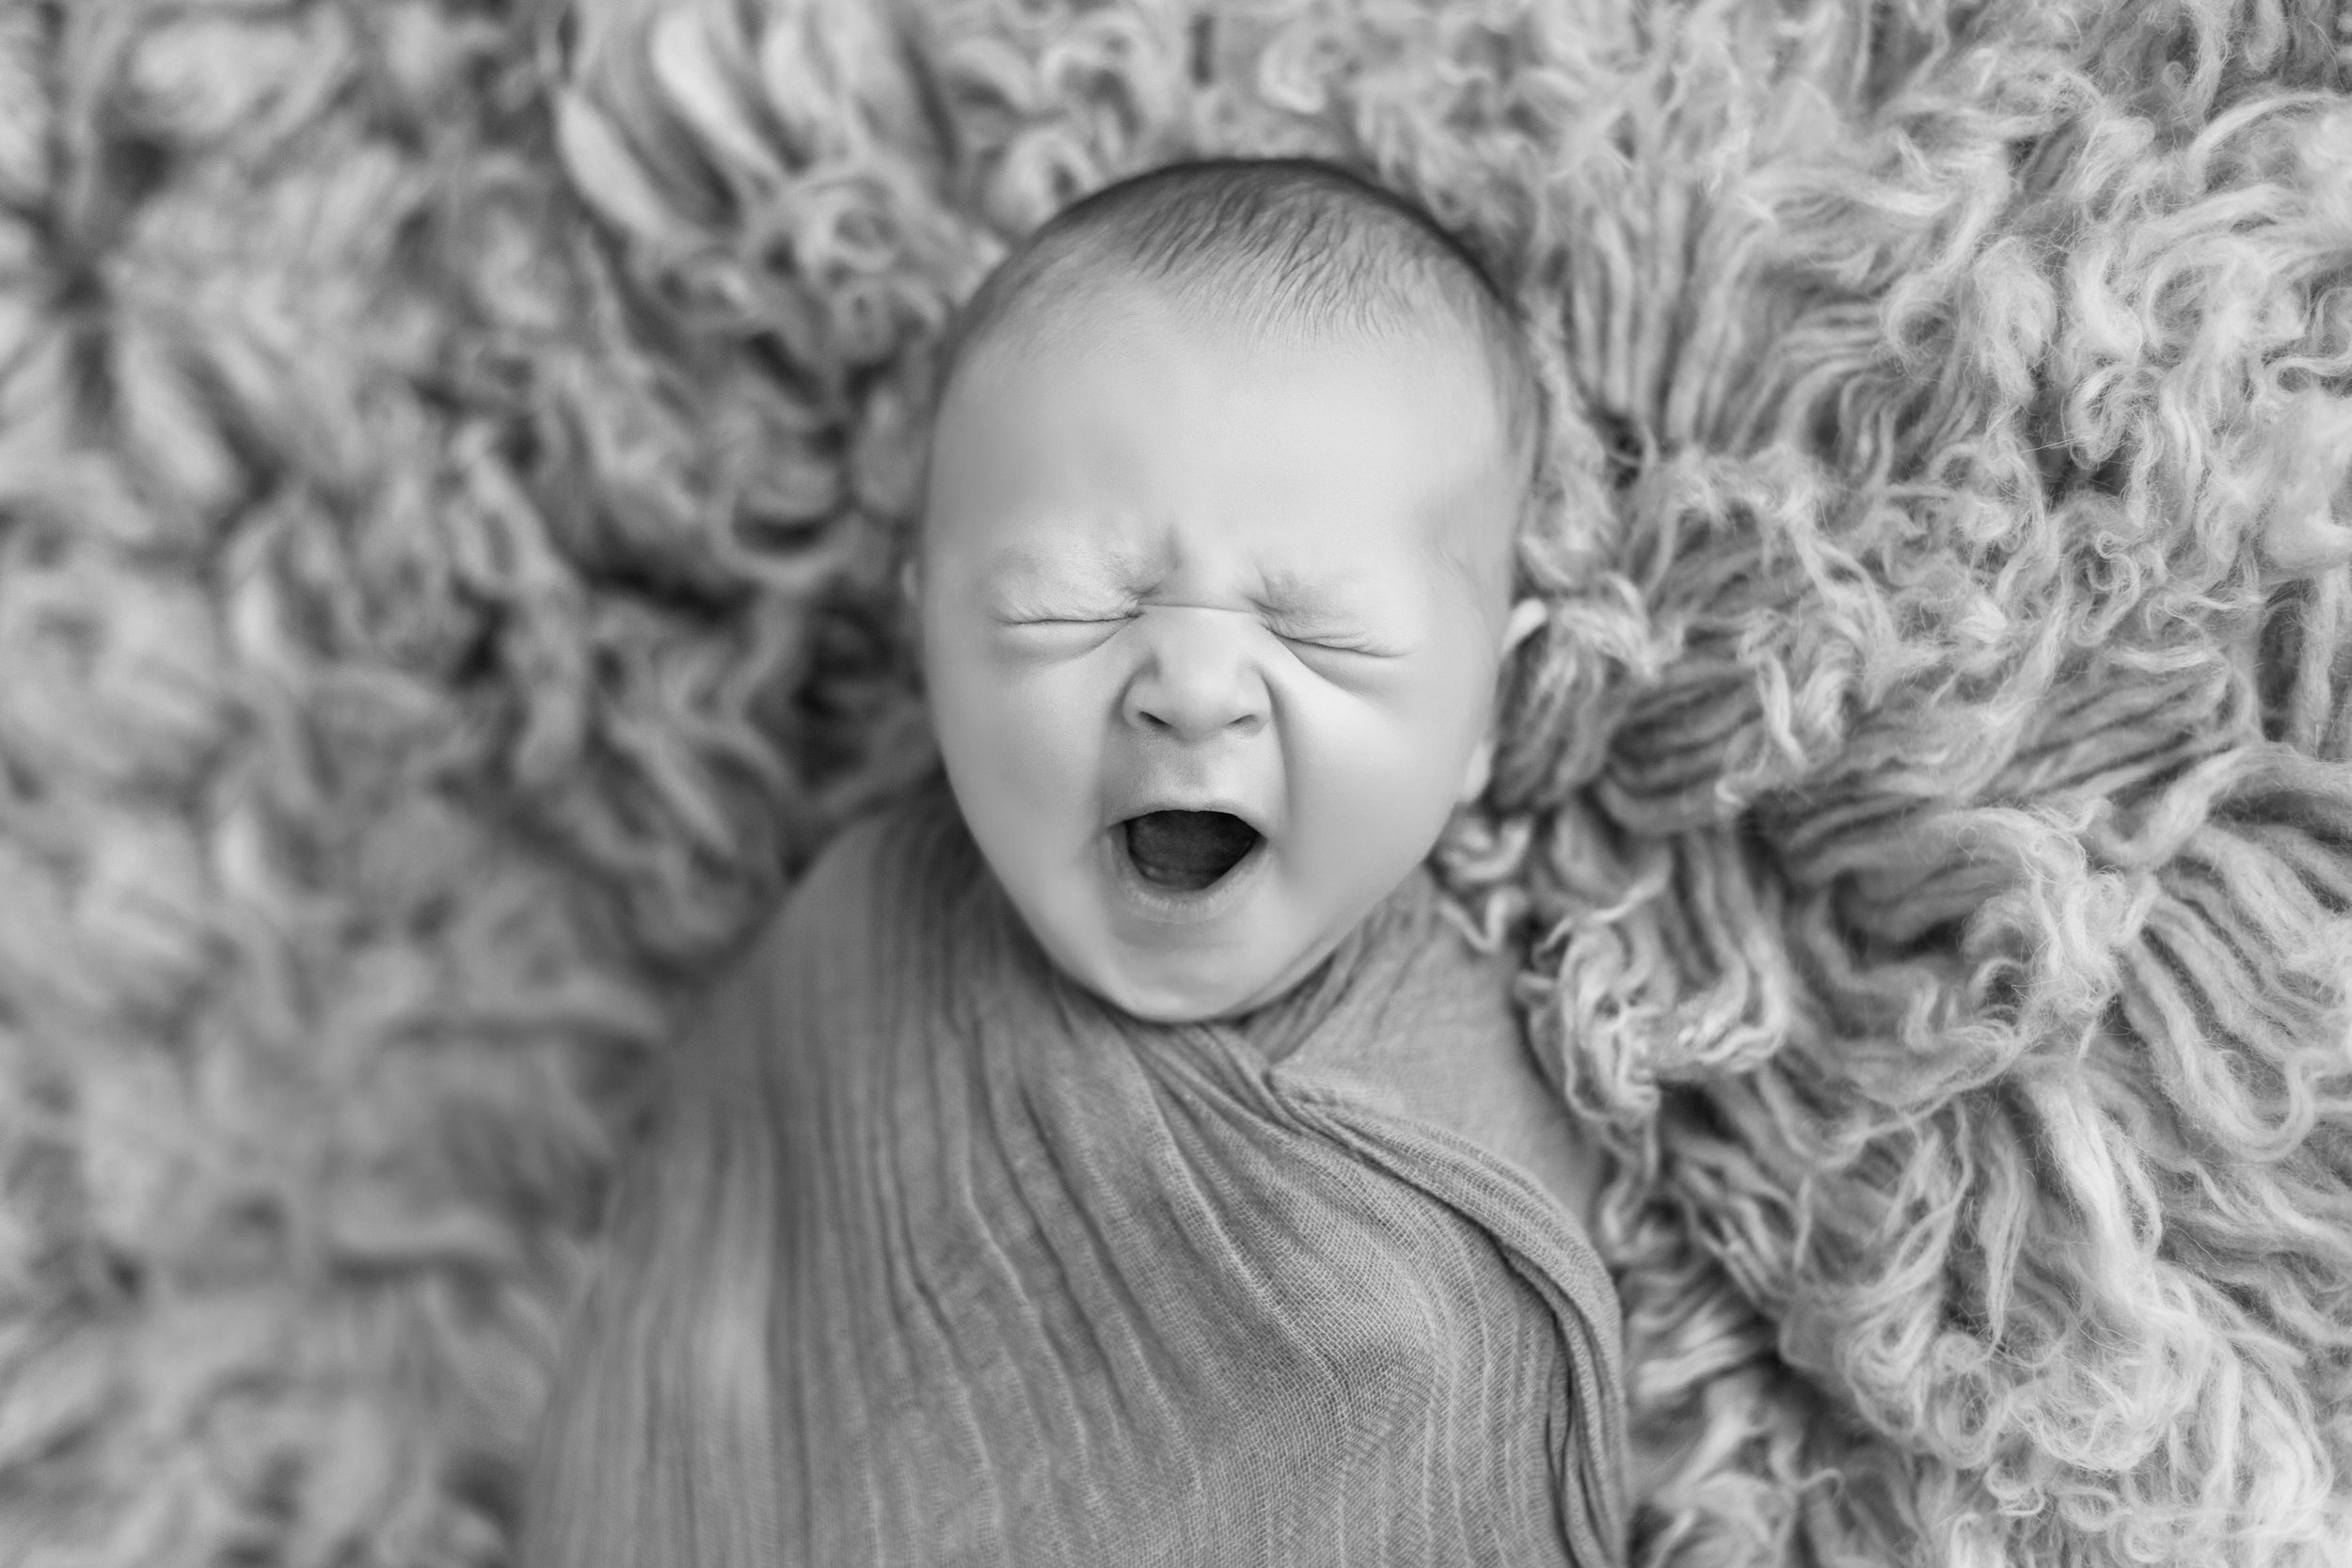  baby boy yawning as he lays on a fuzzy rug in black and white